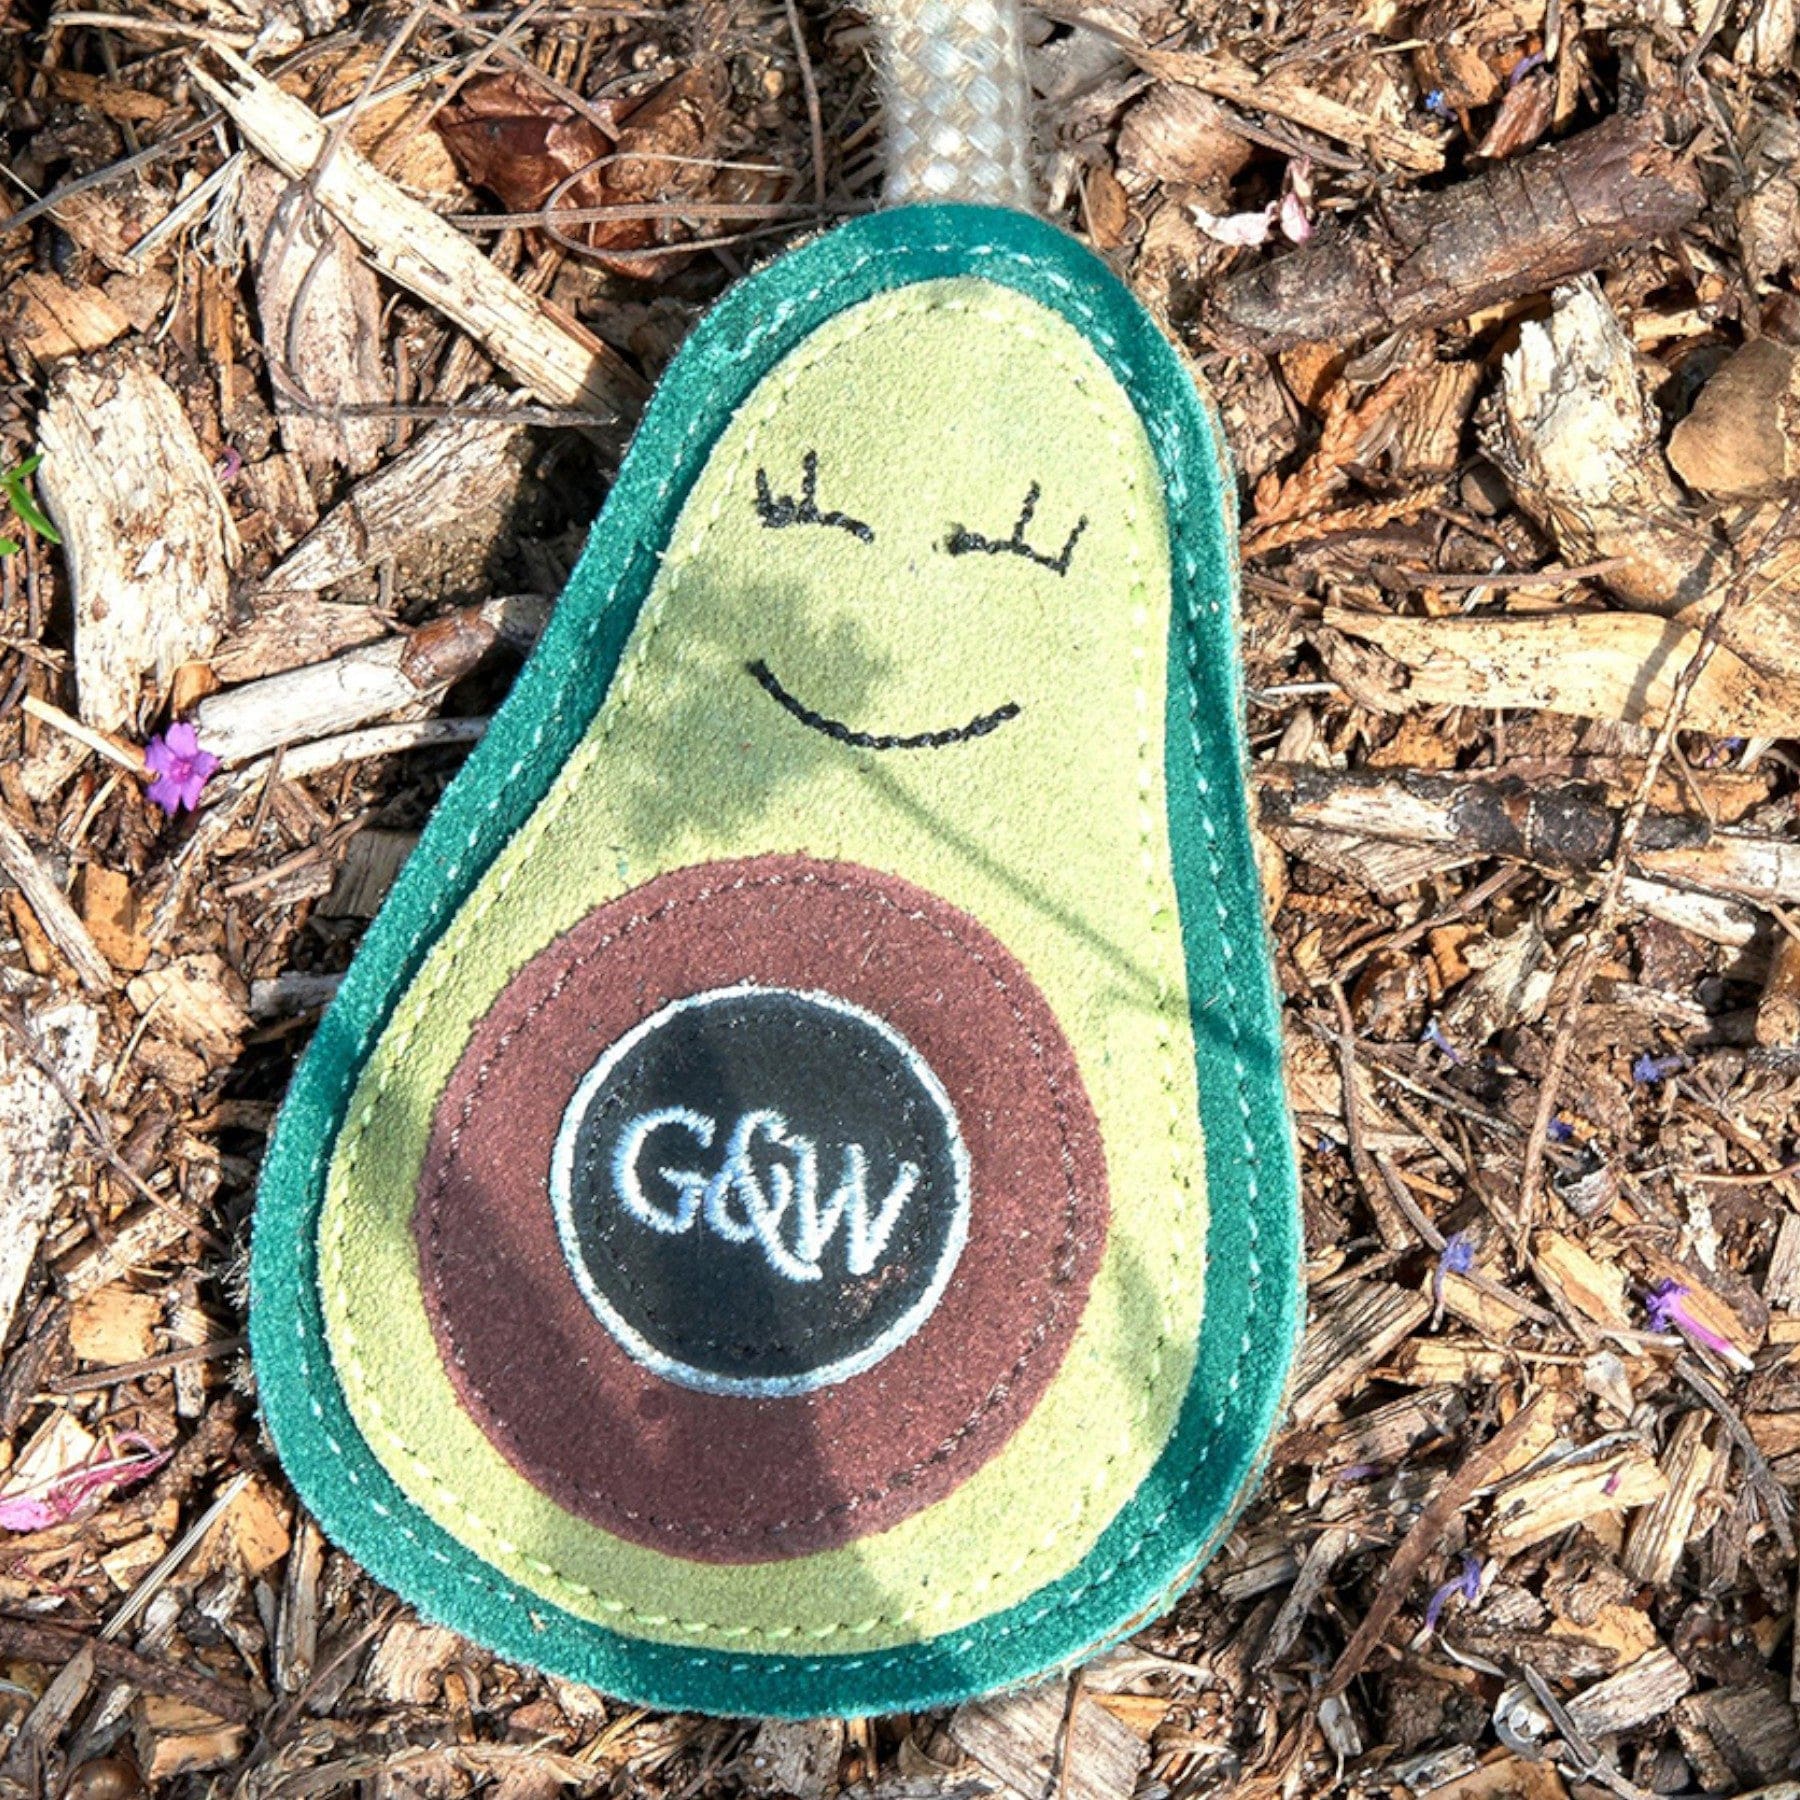 Alt text: Smiling avocado plush toy with a happy face on a bed of wood chips and twigs, featuring vibrant green and brown colors with a prominent seed design displaying "GW" initials.